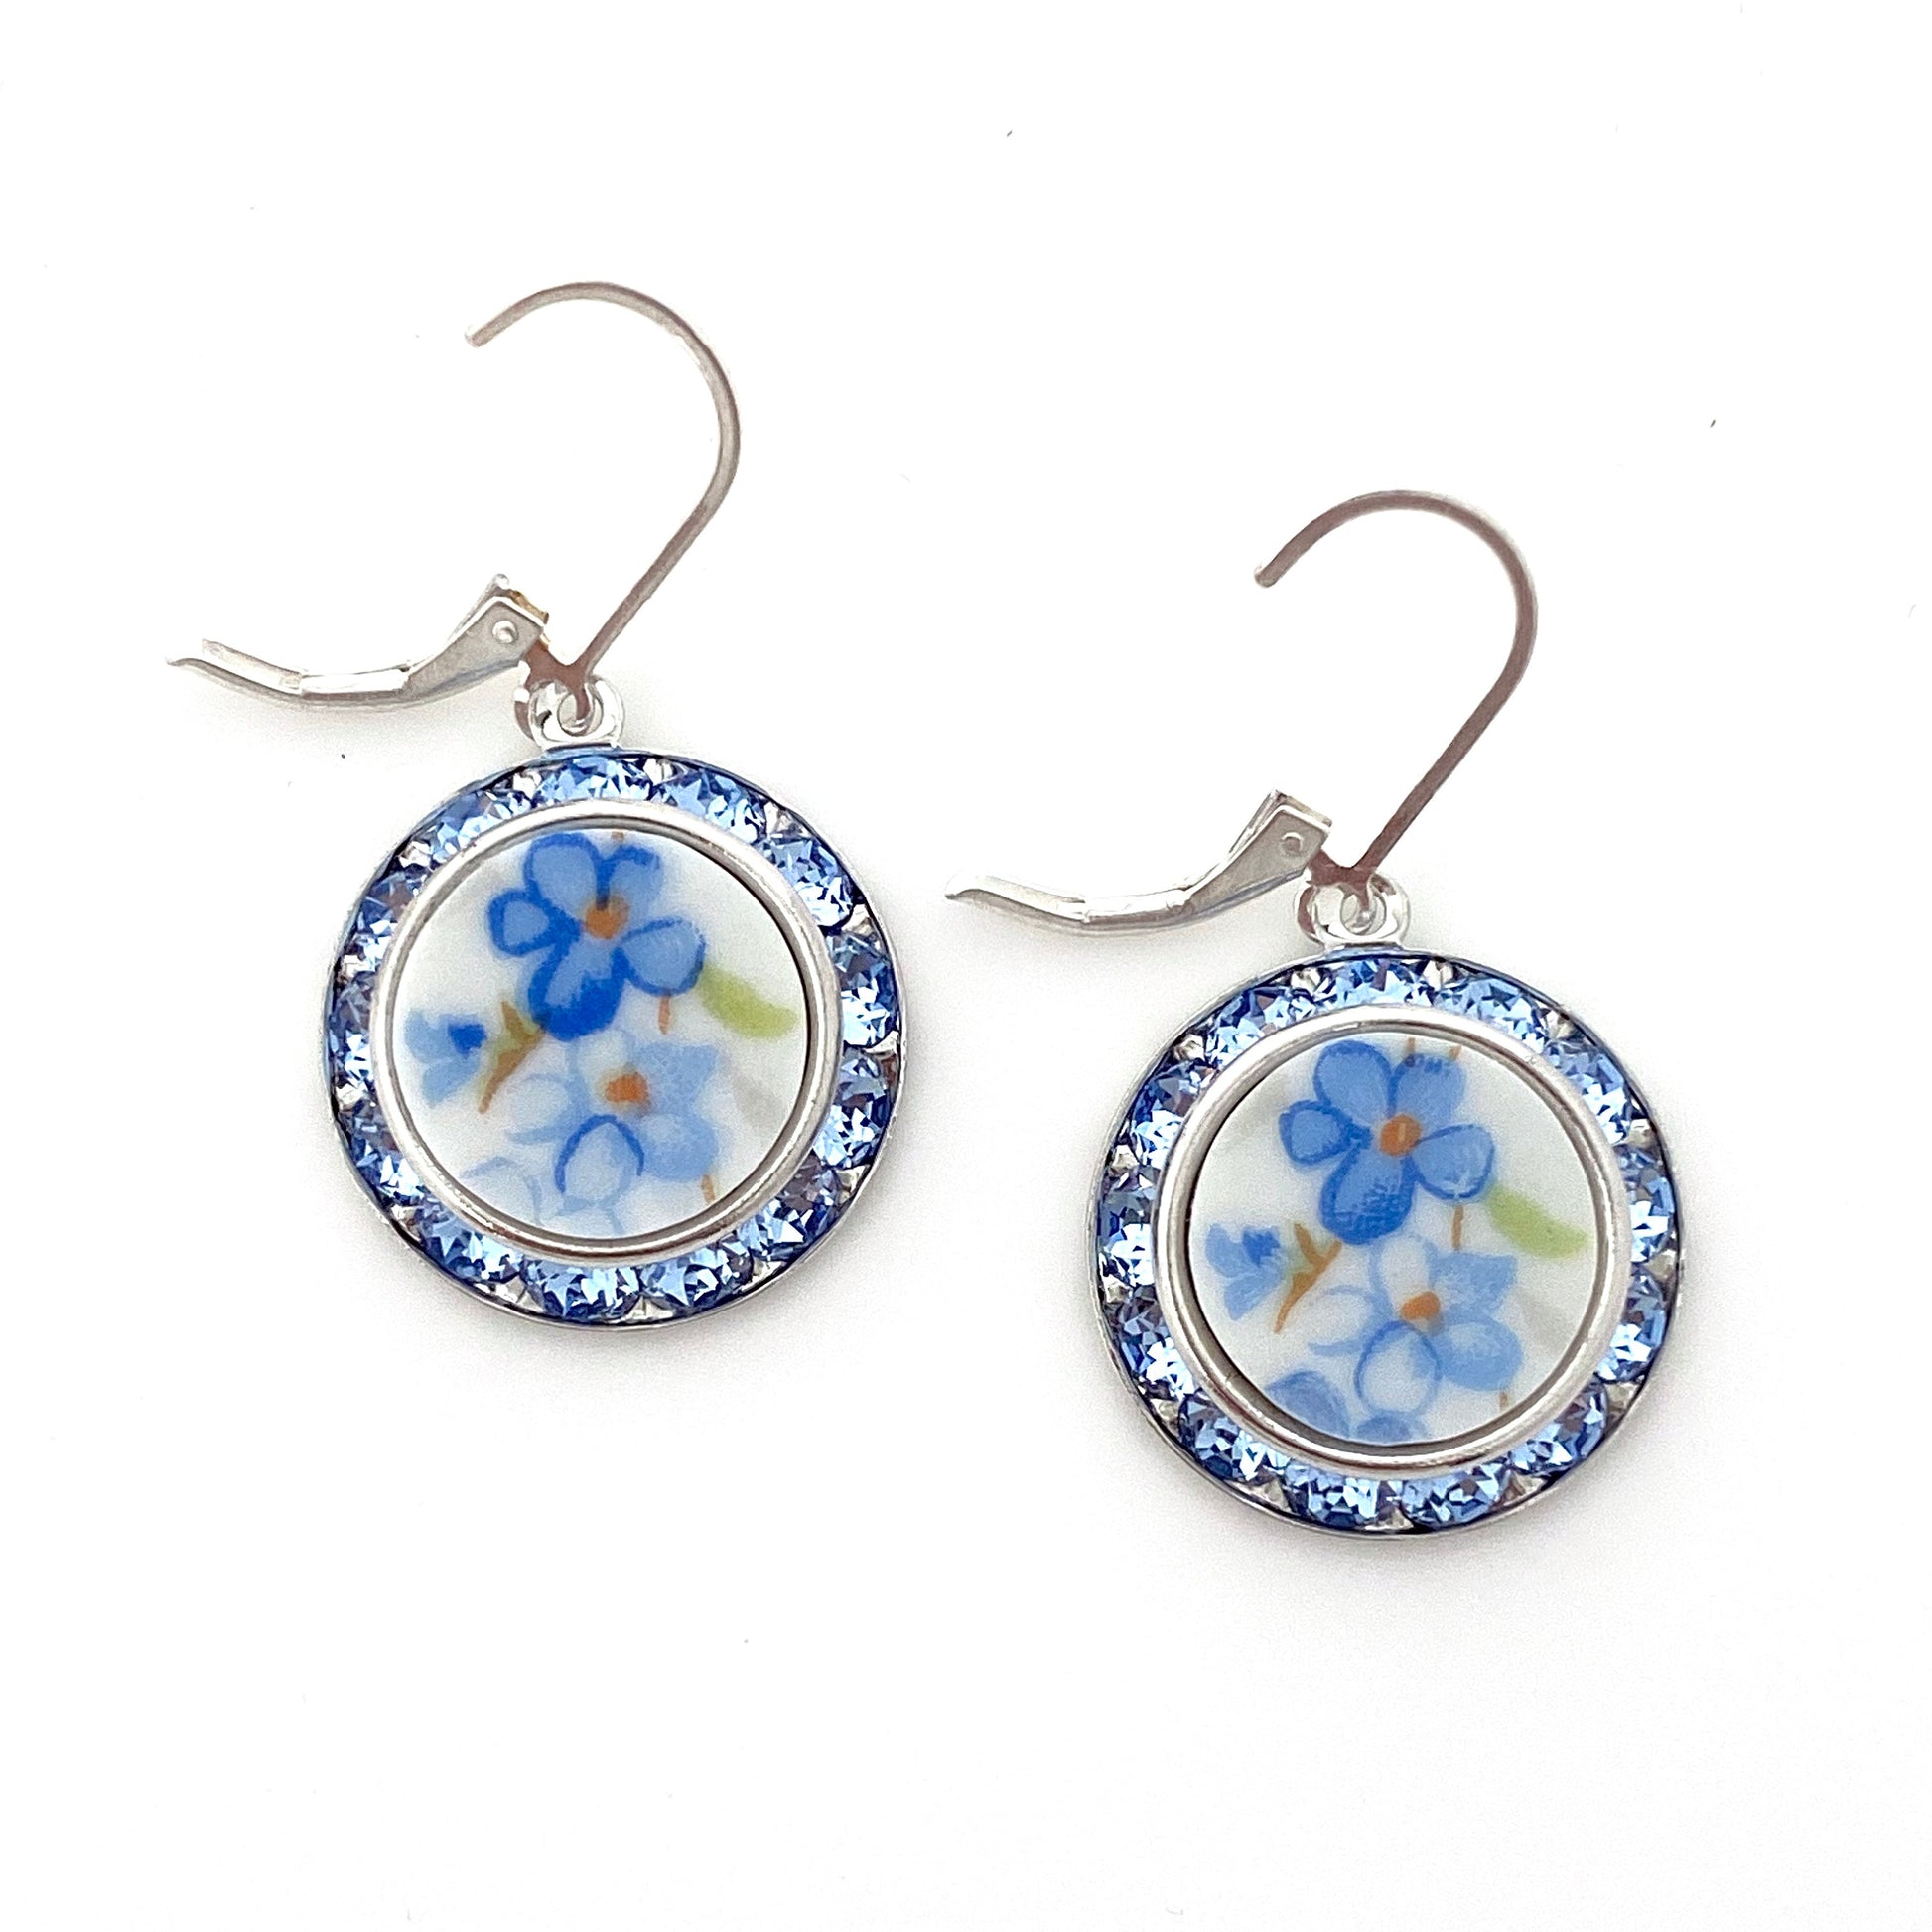 Broken China Jewelry Statement Earrings, Forget Me Not Victorian Earrings, Crystal Earrings, Unique Gifts for Women